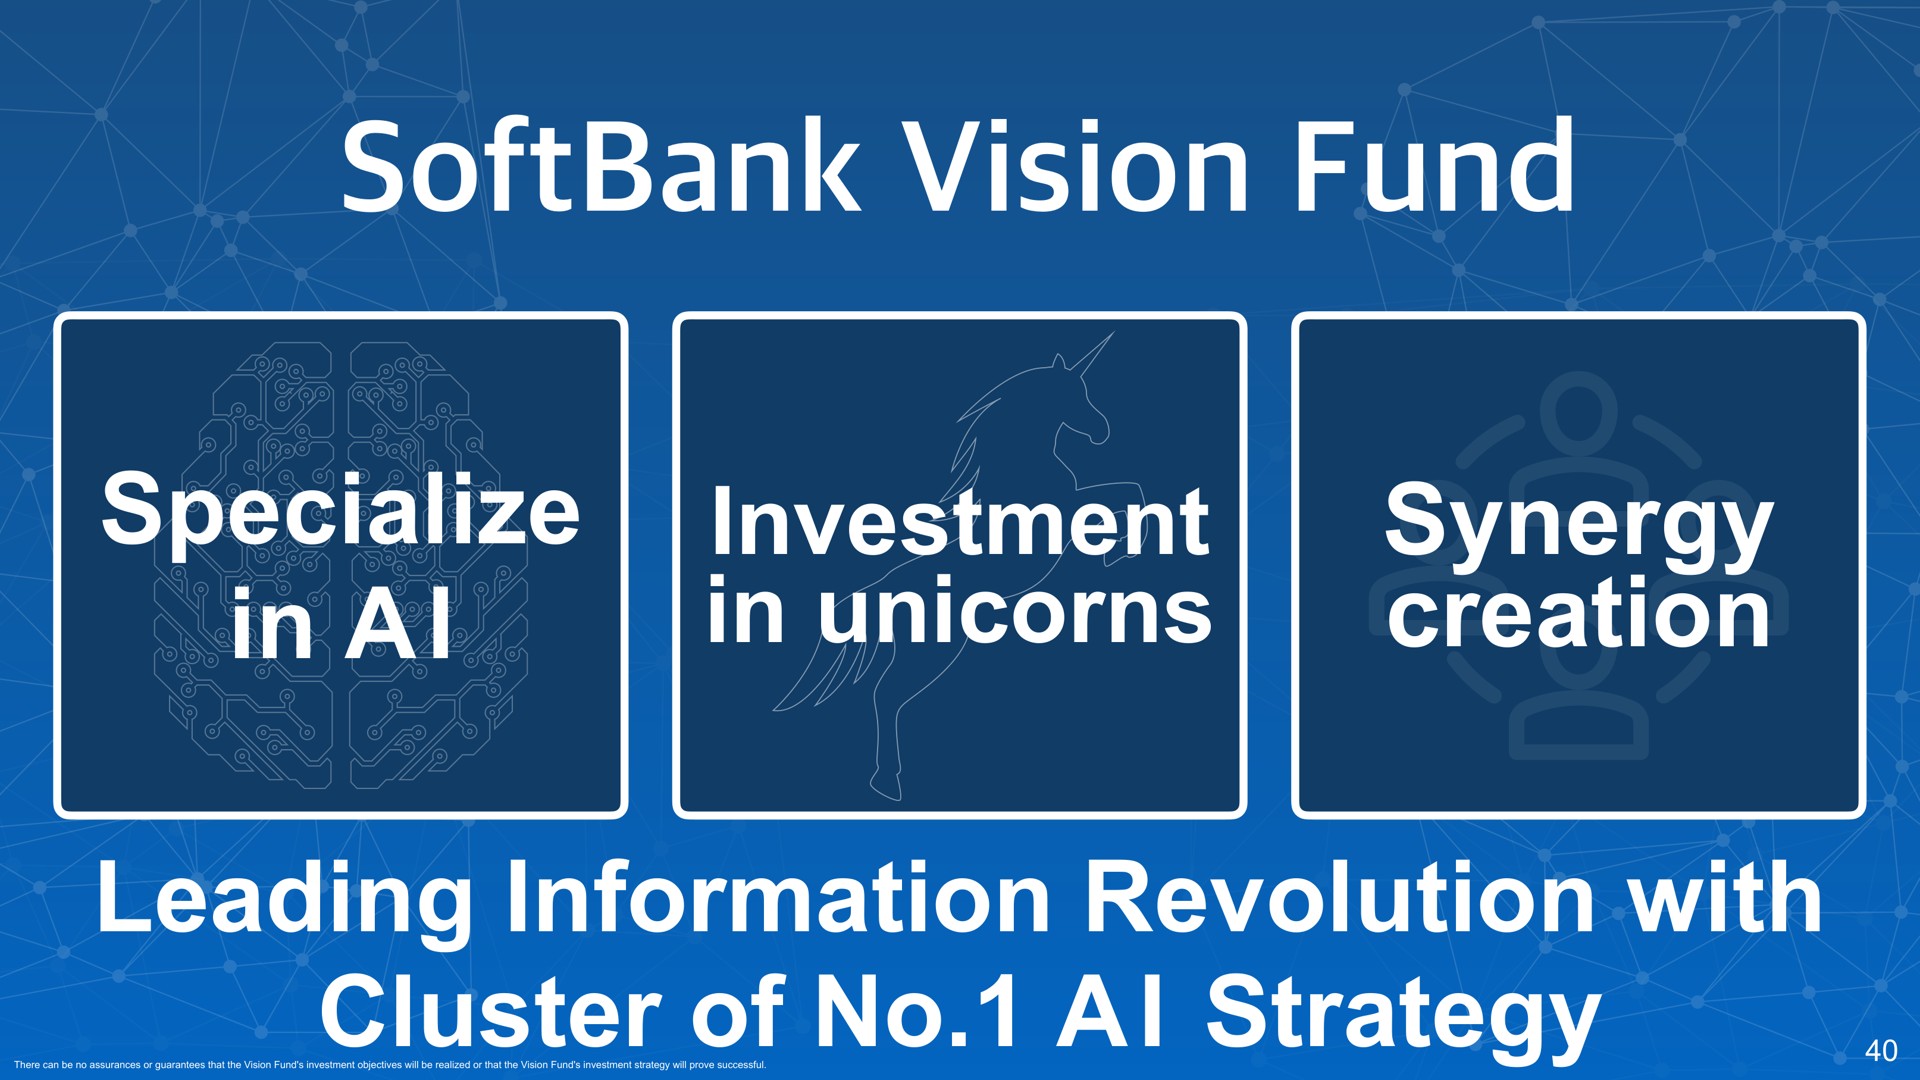 vision fund specialize in a i investment in unicorns synergy creation leading information revolution with cluster of no a i strategy | SoftBank